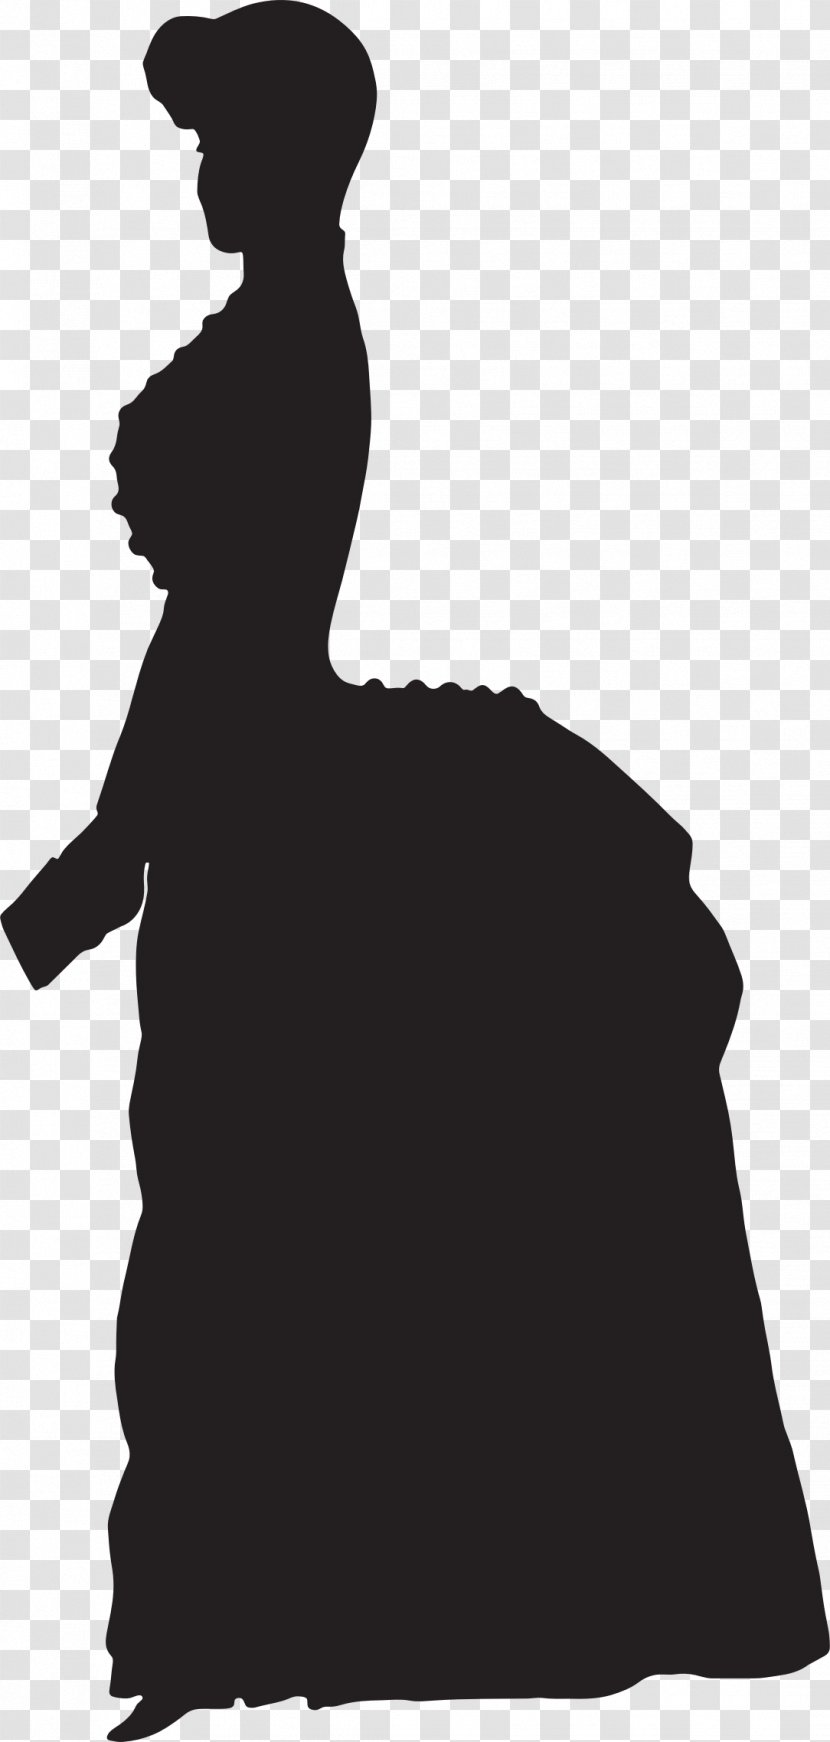 Silhouette Woman Victorian Era - Monochrome - Old Time Transparent PNG